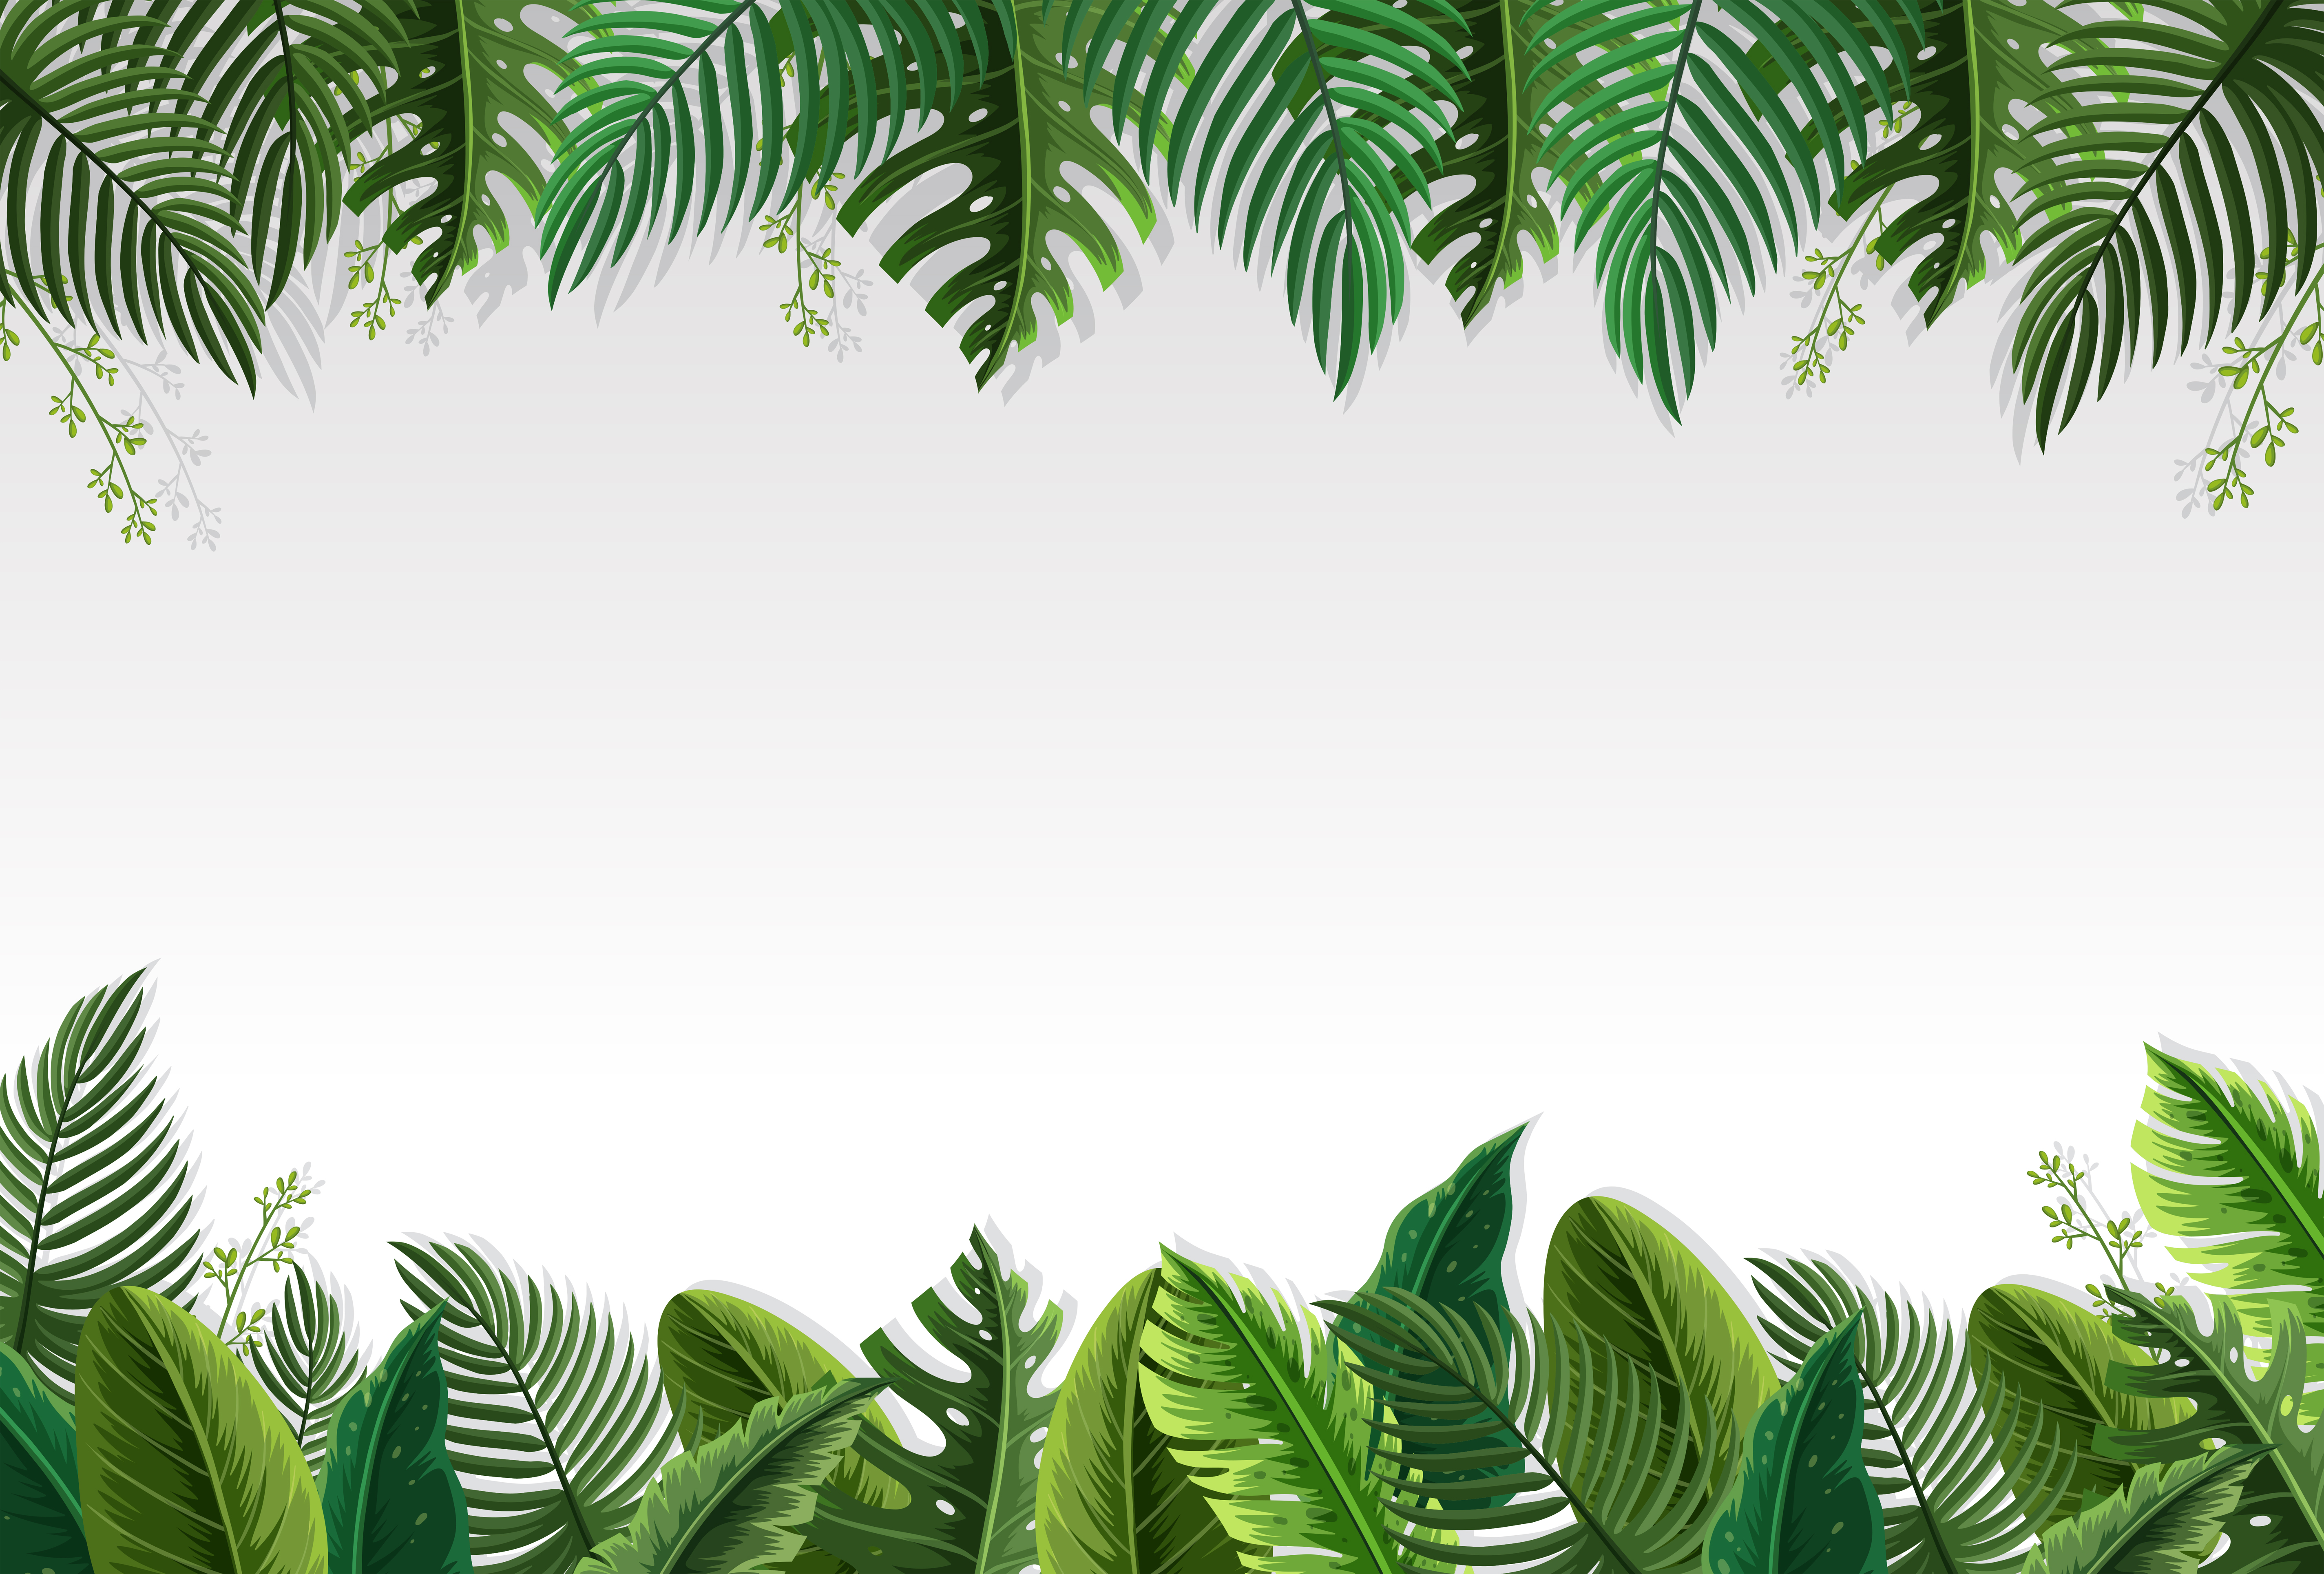 Download Palm Tree Border Free Vector Art - (148 Free Downloads)